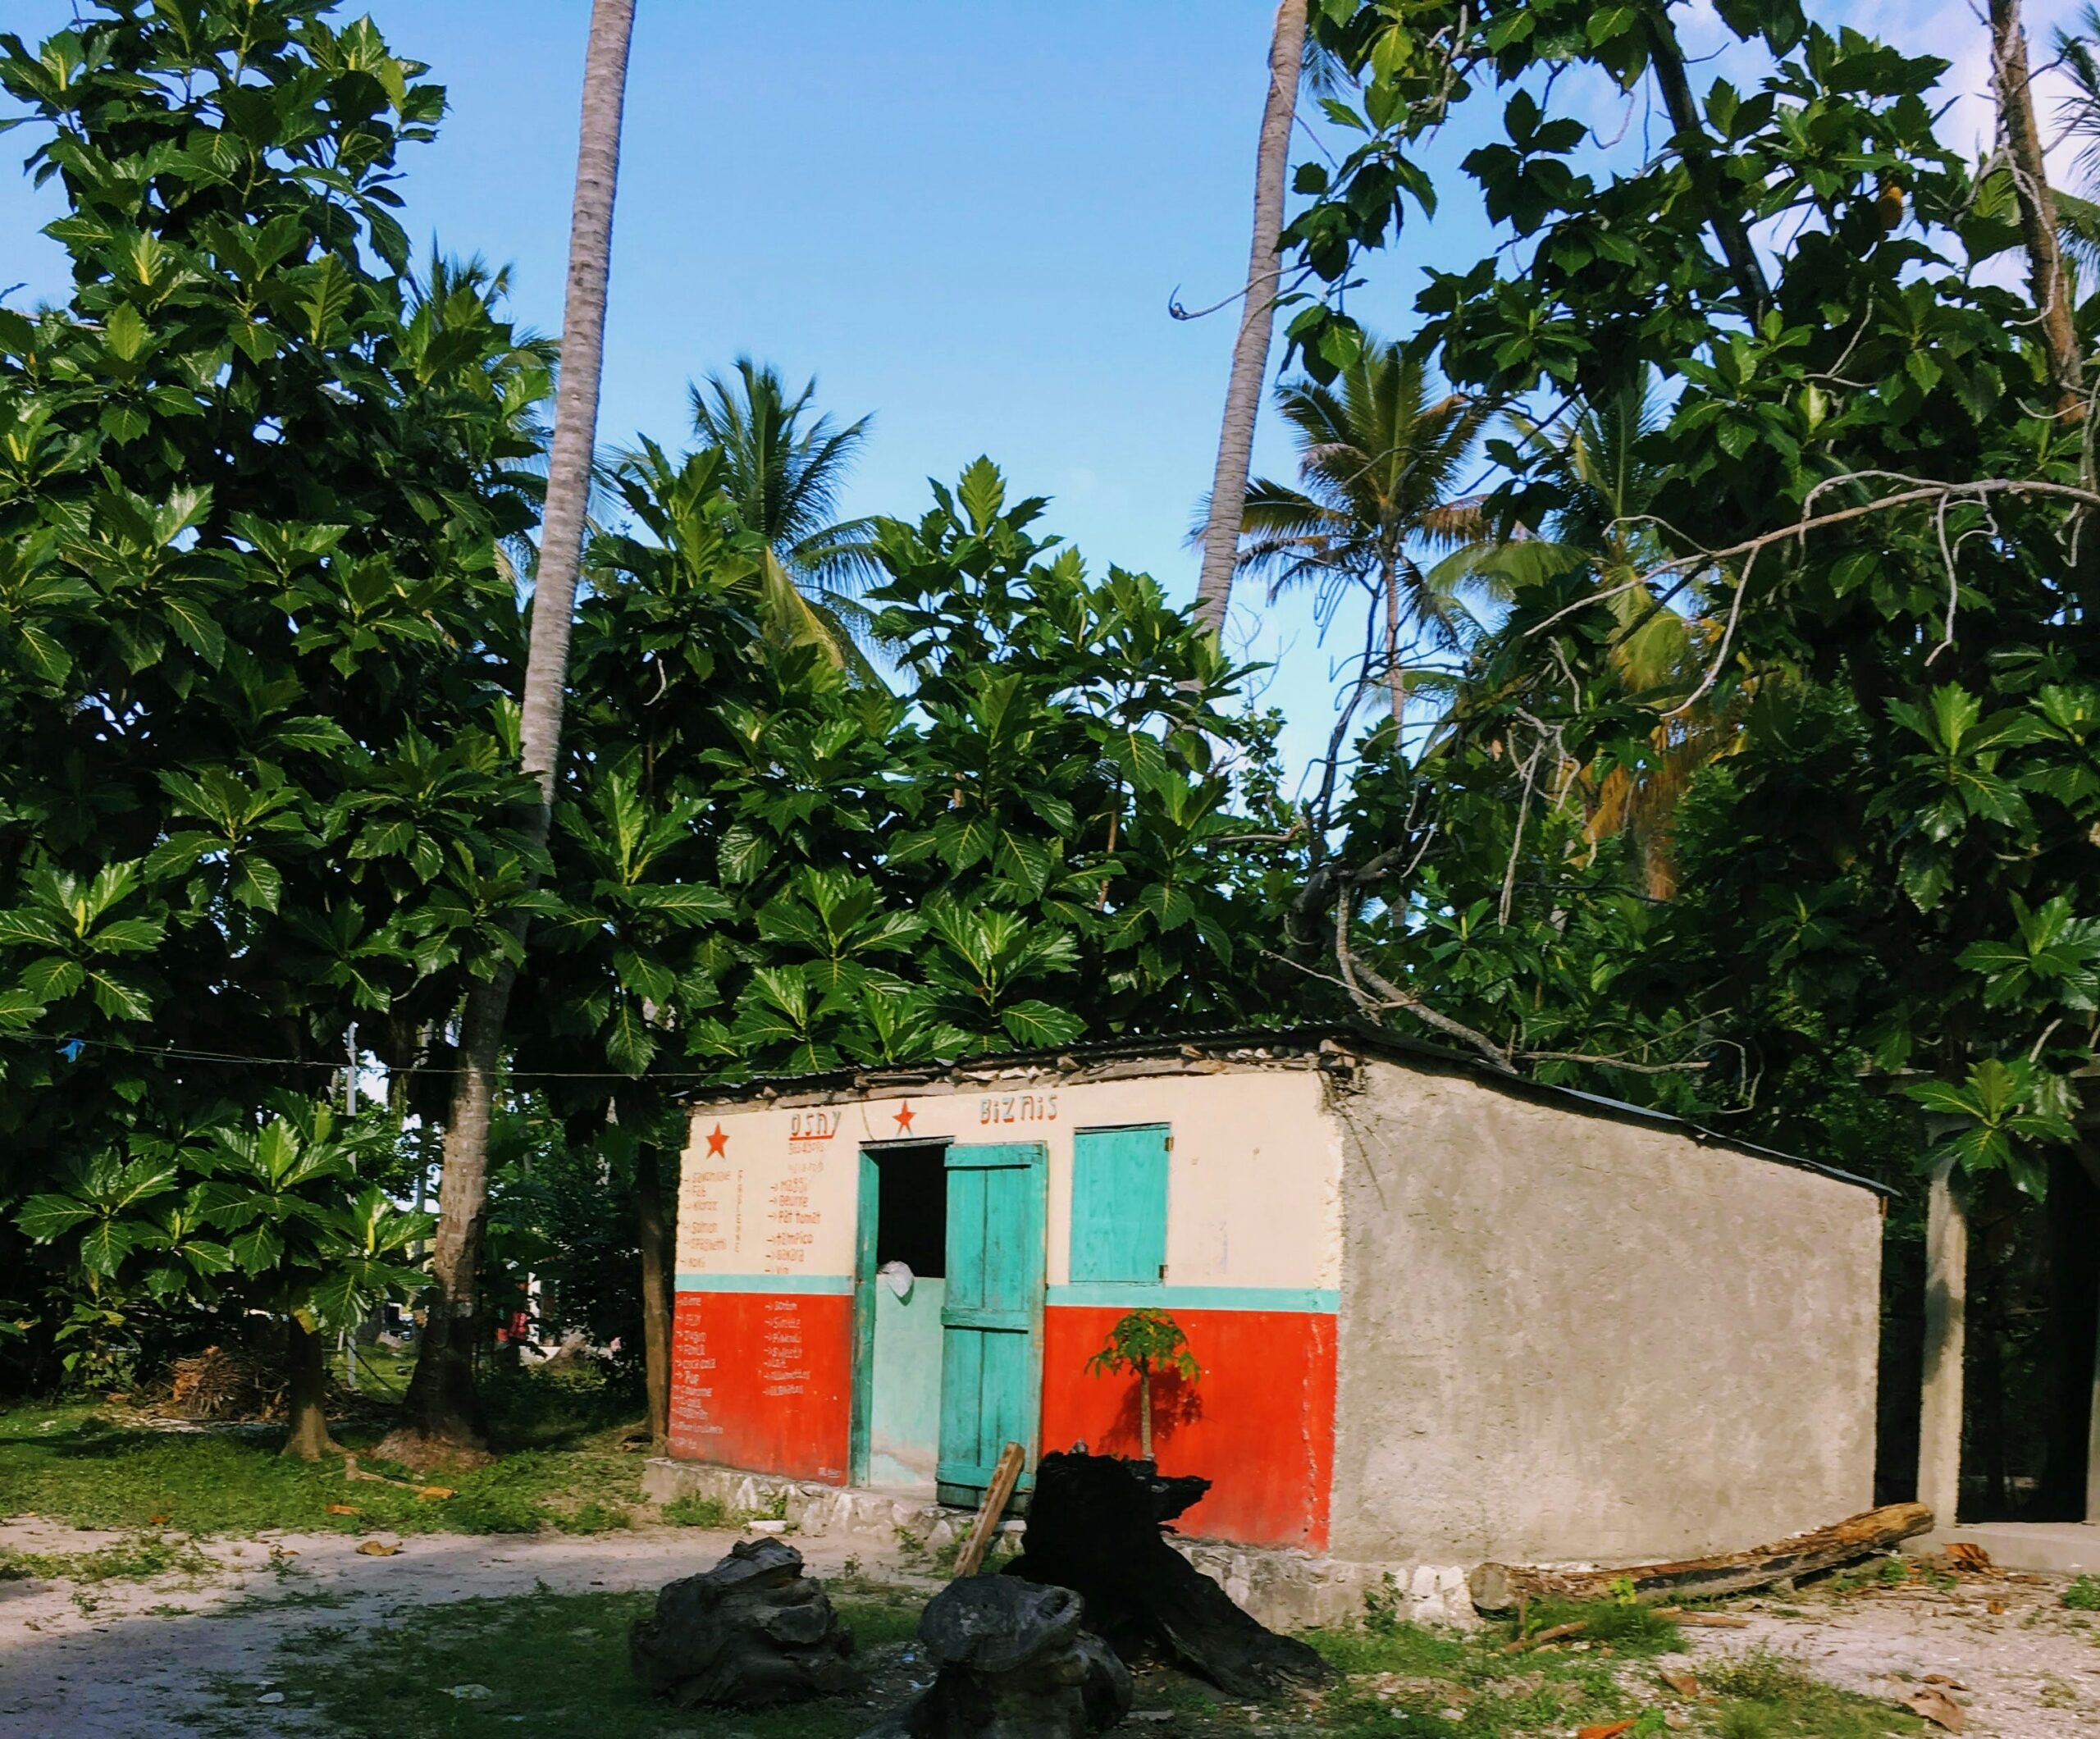 The new leadership in Haiti is the first step to recovering the country. 
pictured: a building in Haiti